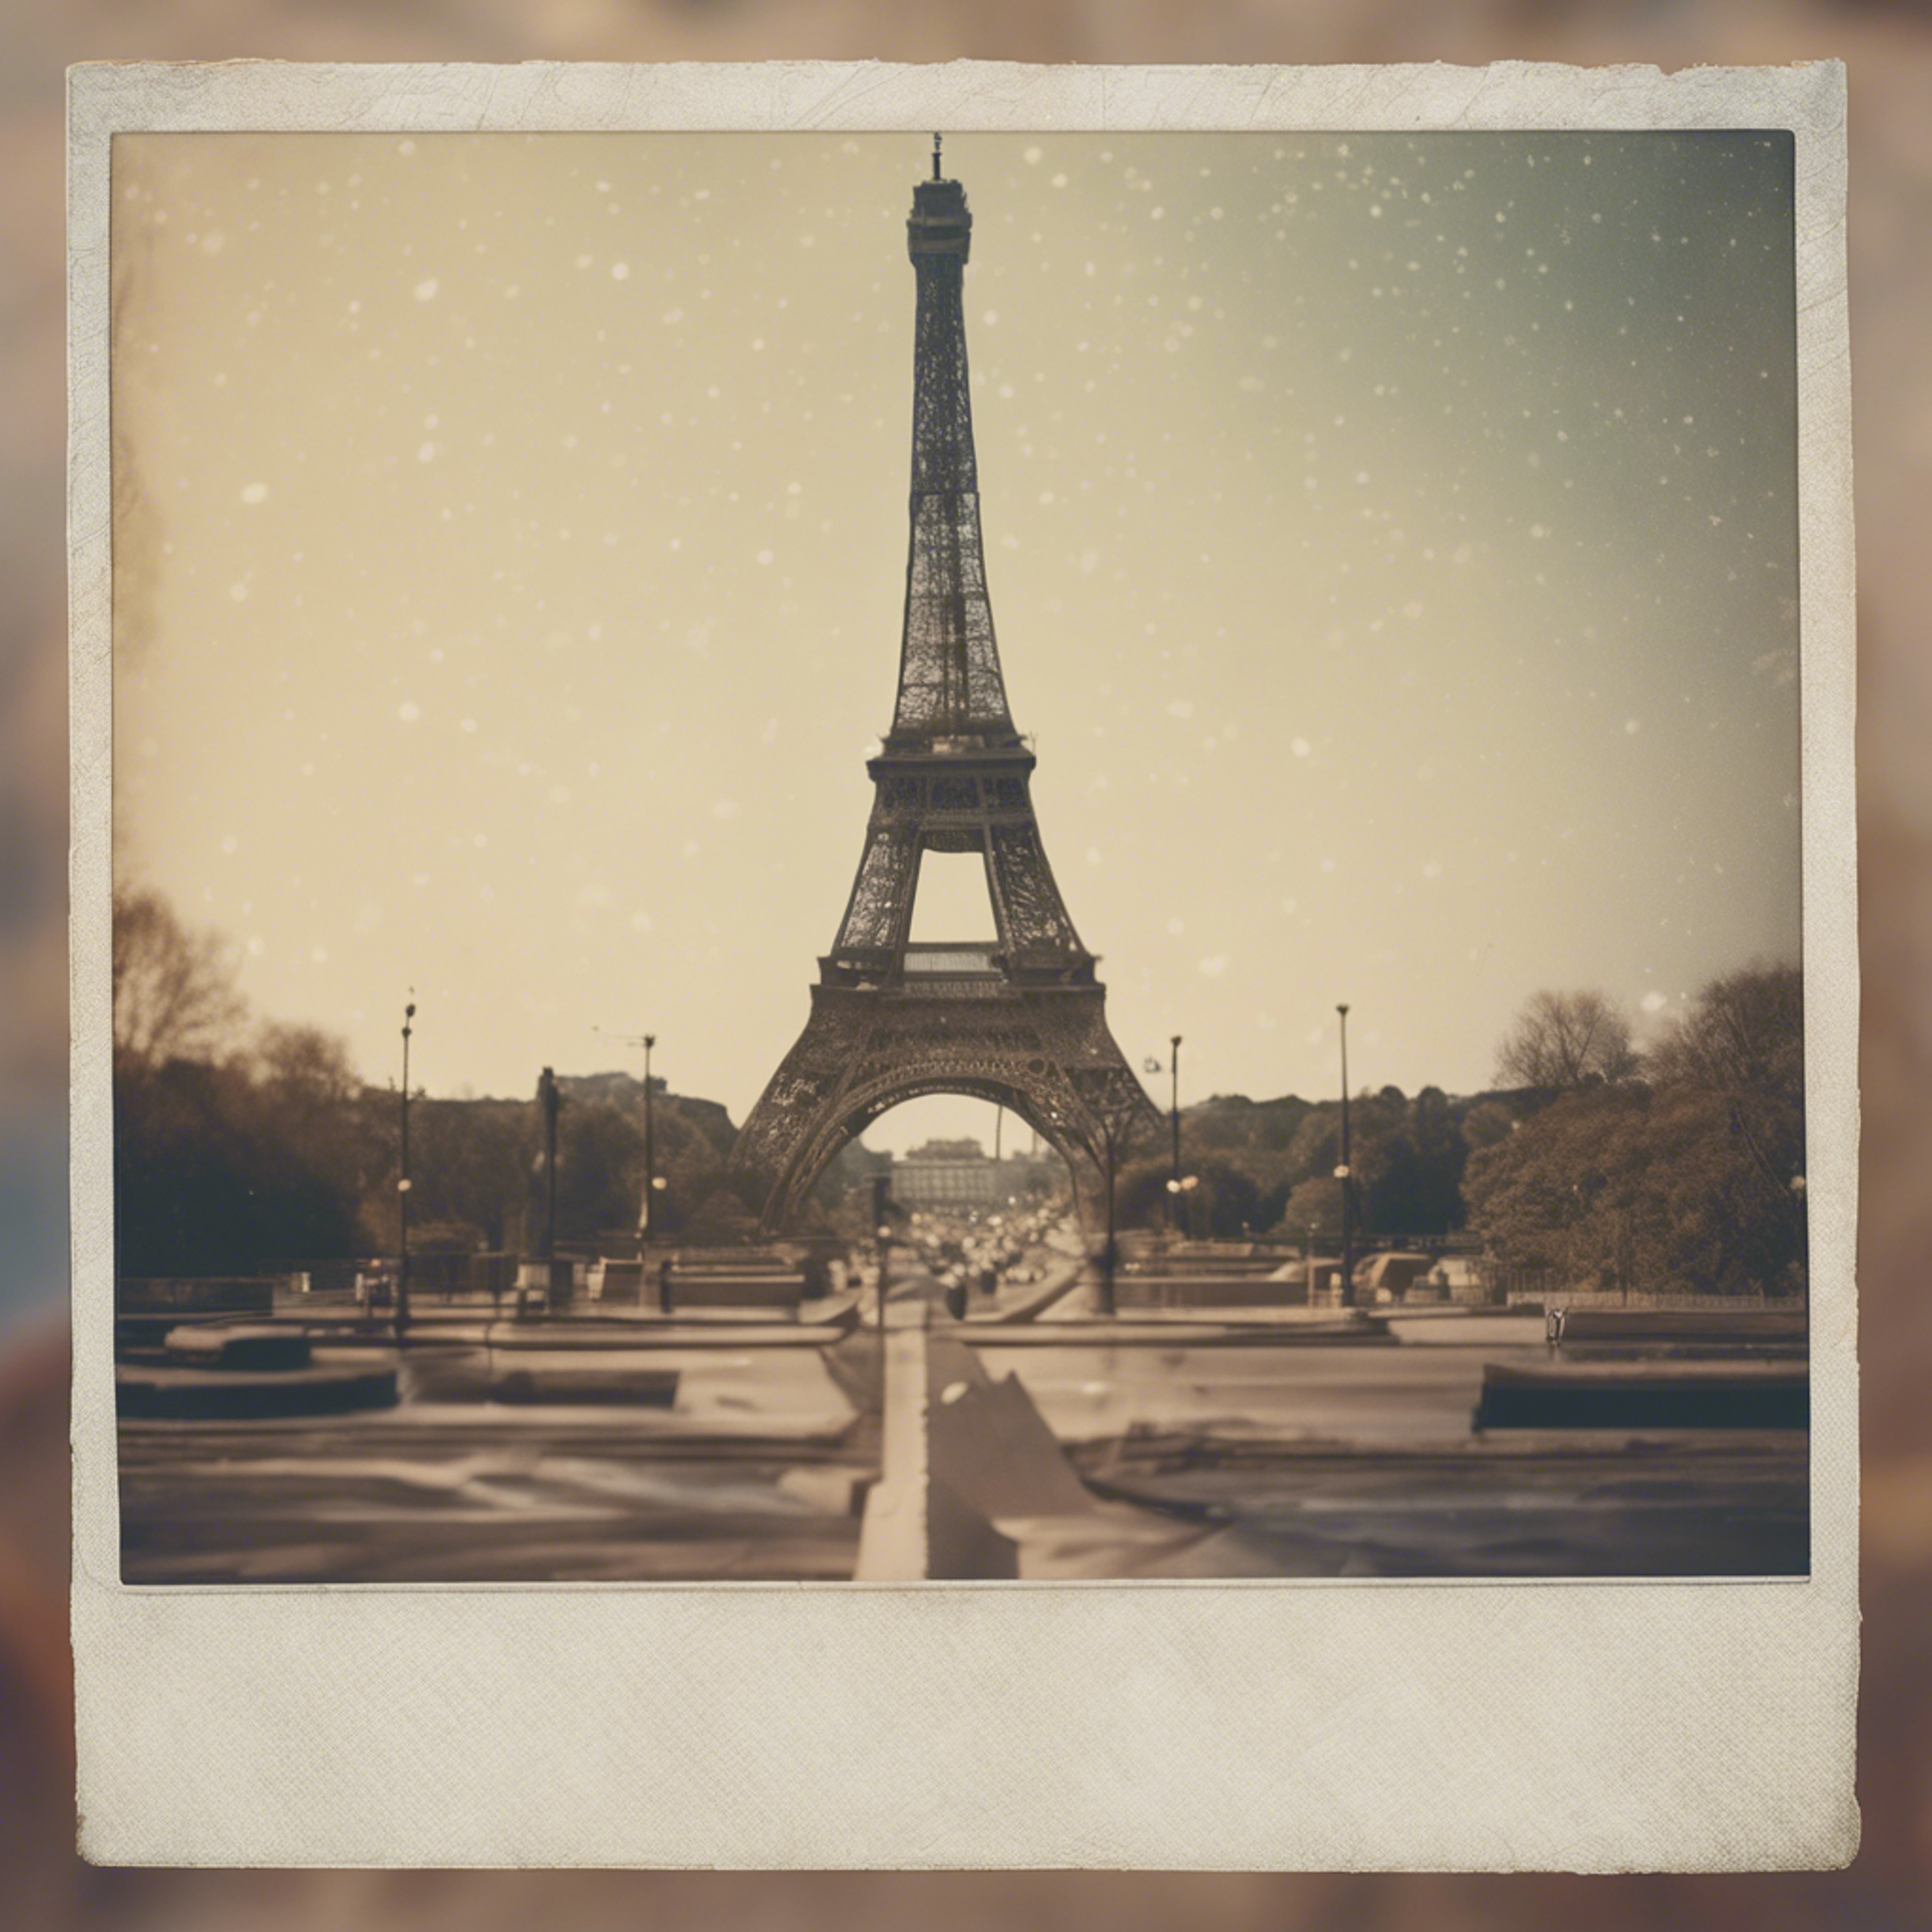 A faded beige Polaroid picture of an iconic landmark from the 70s. טפט[3ceb93f71d2c49b28cf4]